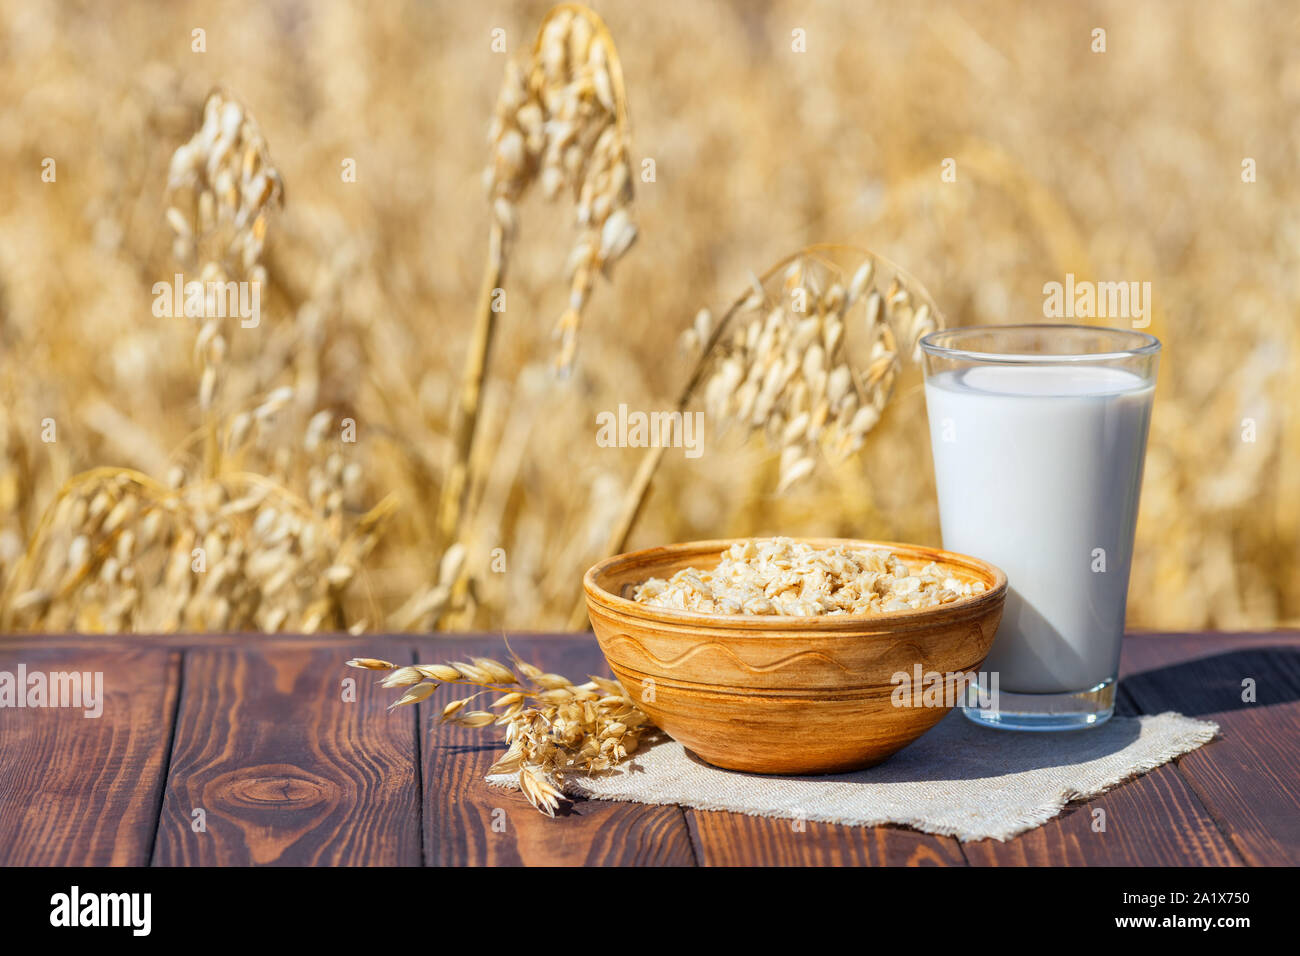 vegan oat milk in glass with oatmeal in bowl on table over against ripe cereal field Stock Photo